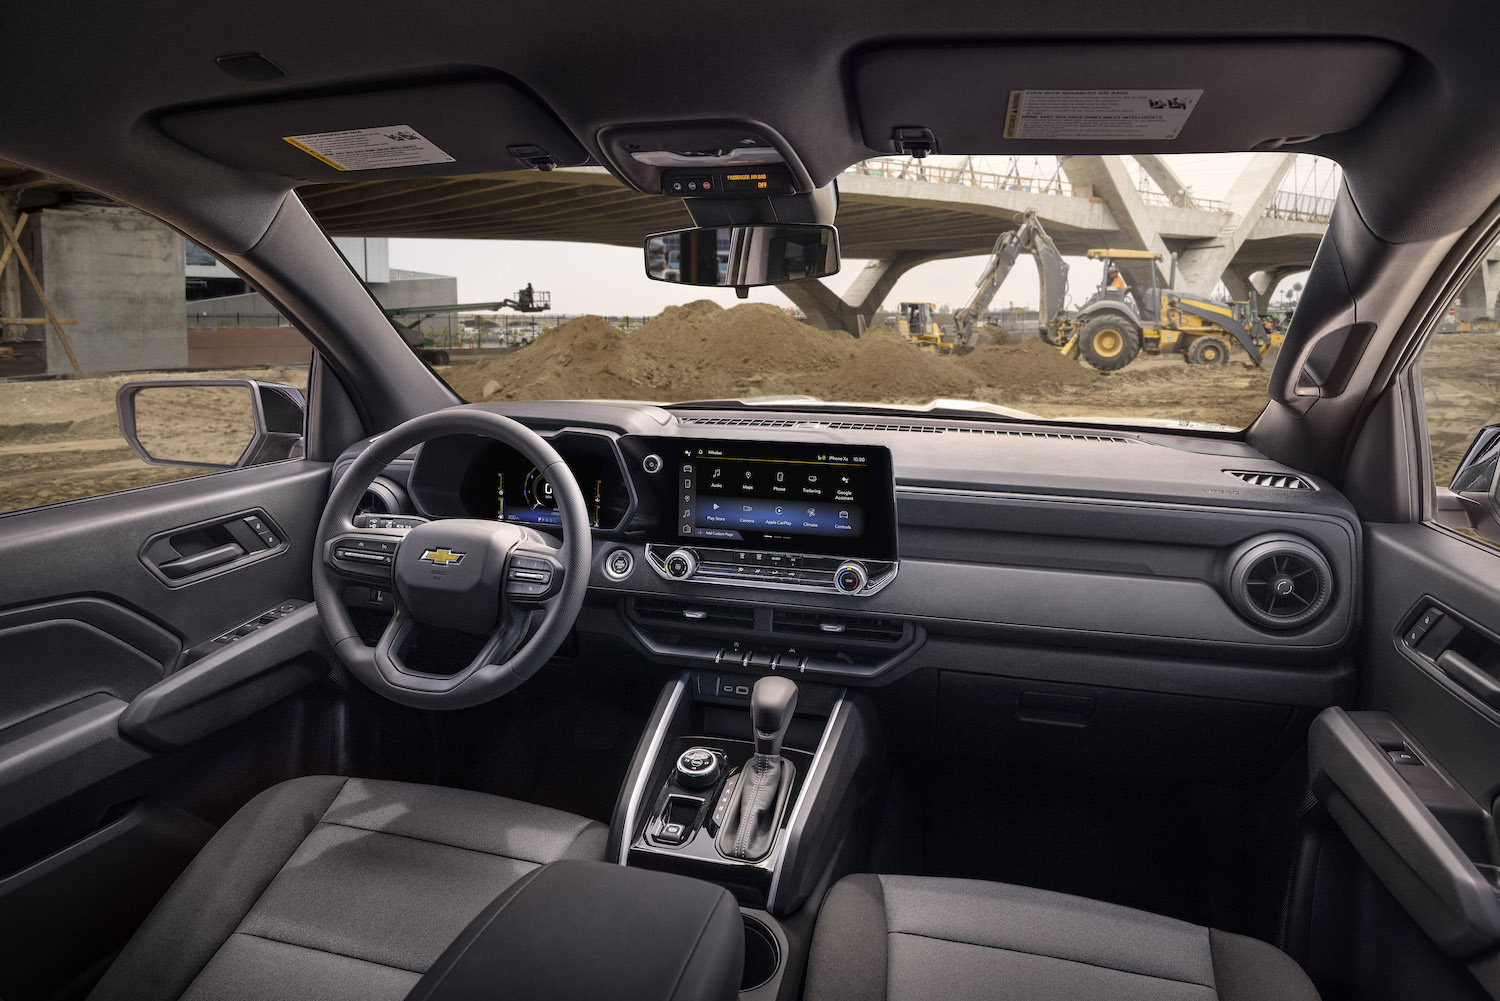 2023 Chevrolet Colorado Interior of the WT trim at a job site with dirt in the back.